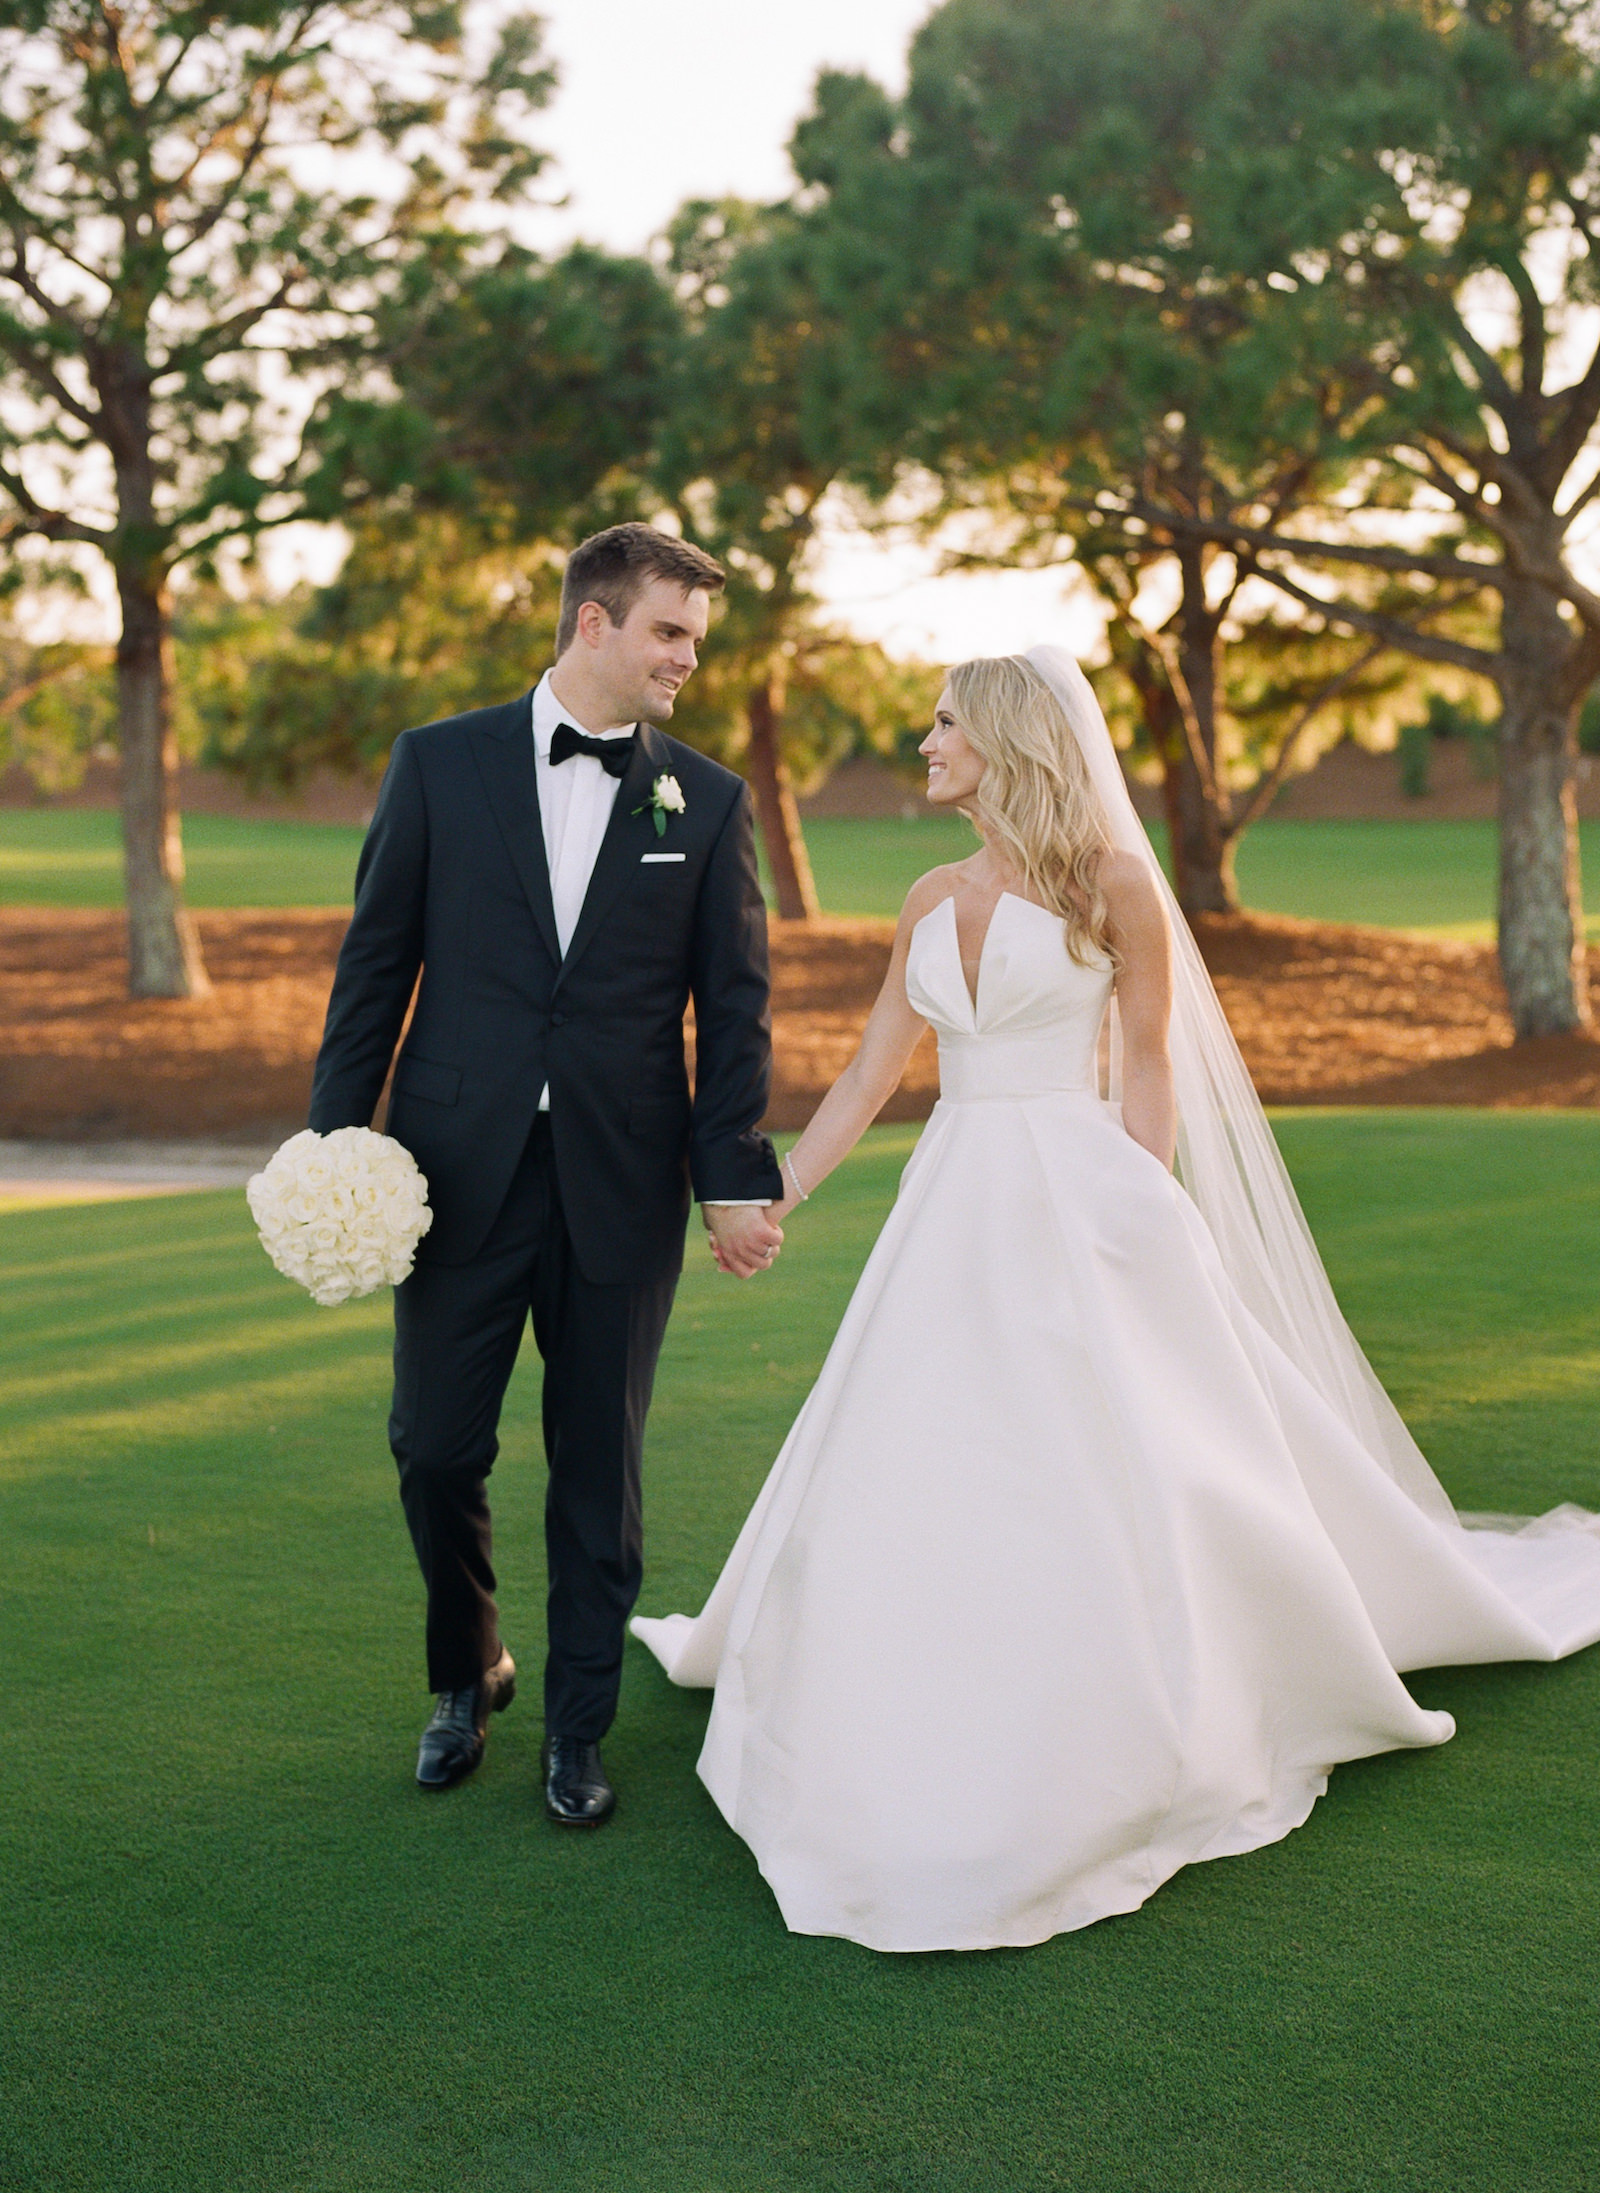 Luxurious Formal All White Wedding, Bride and Groom Holding Hands Walking on Golf Turf, Groom Holding All White Roses Floral Bouquet | Tampa Bay Wedding Florist Bruce Wayne Florals